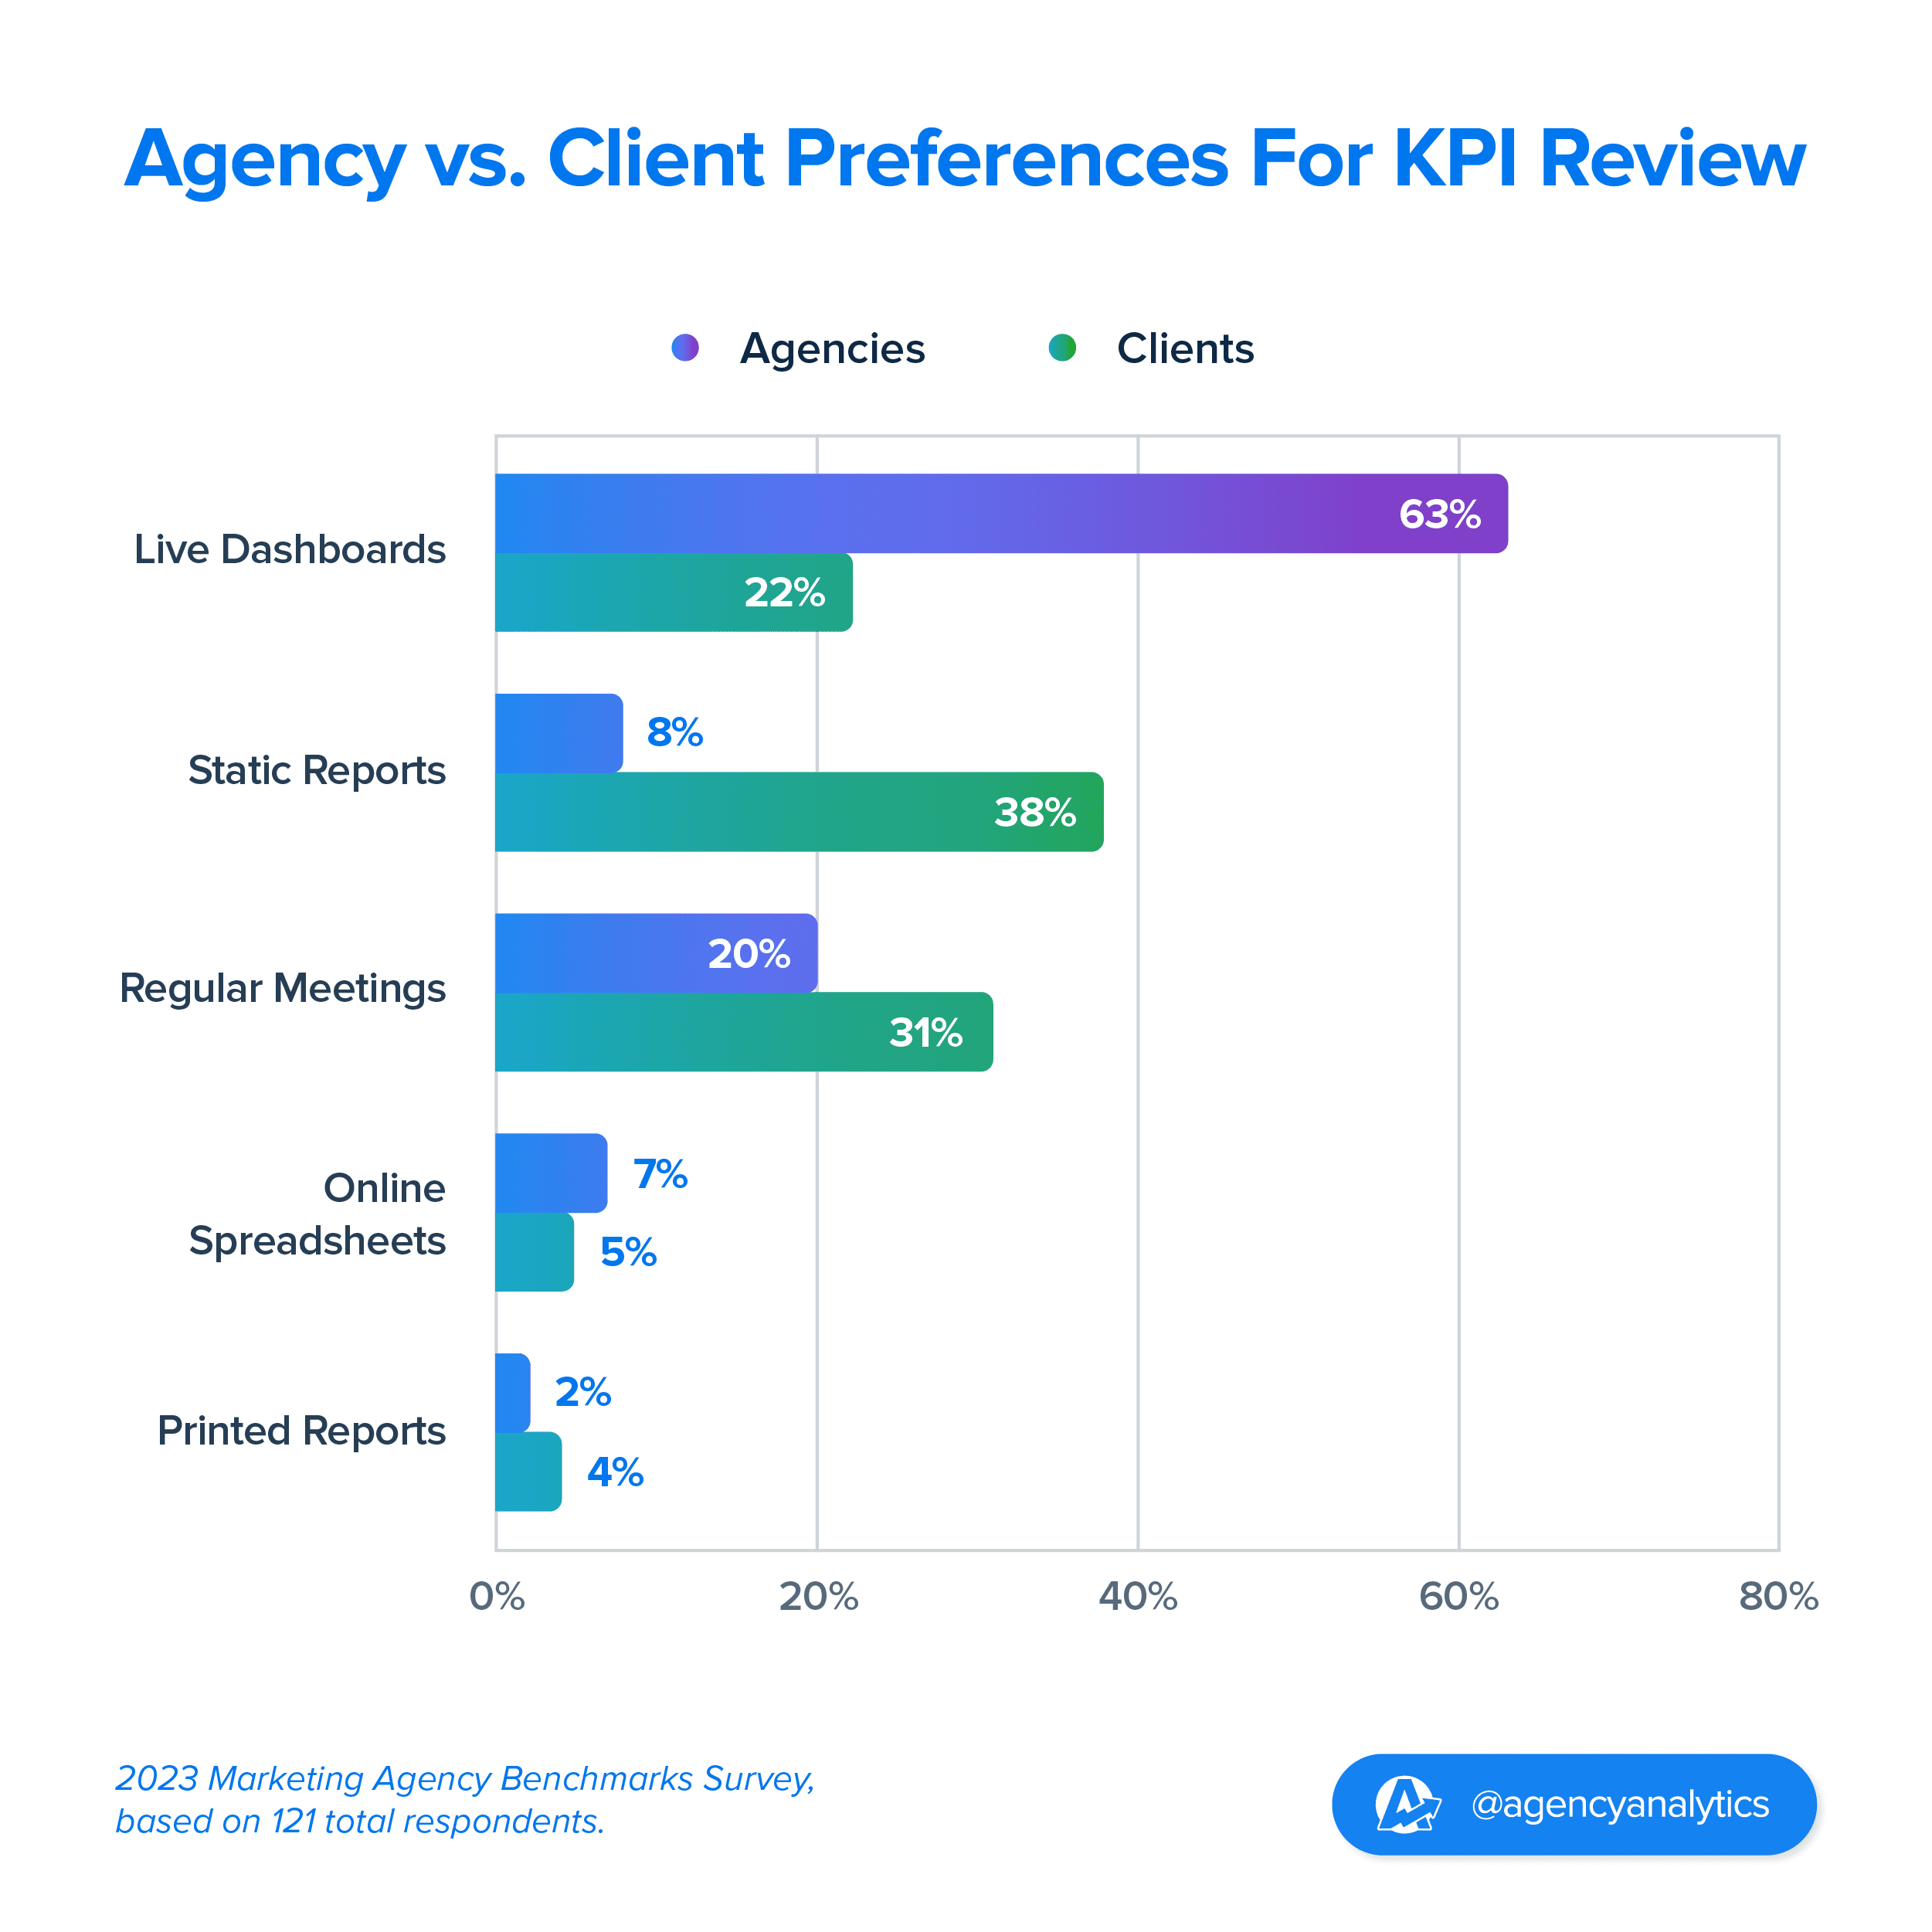 bar chart comparing agency vs. client preferences on live dashboards versus static reports in KPI reviews